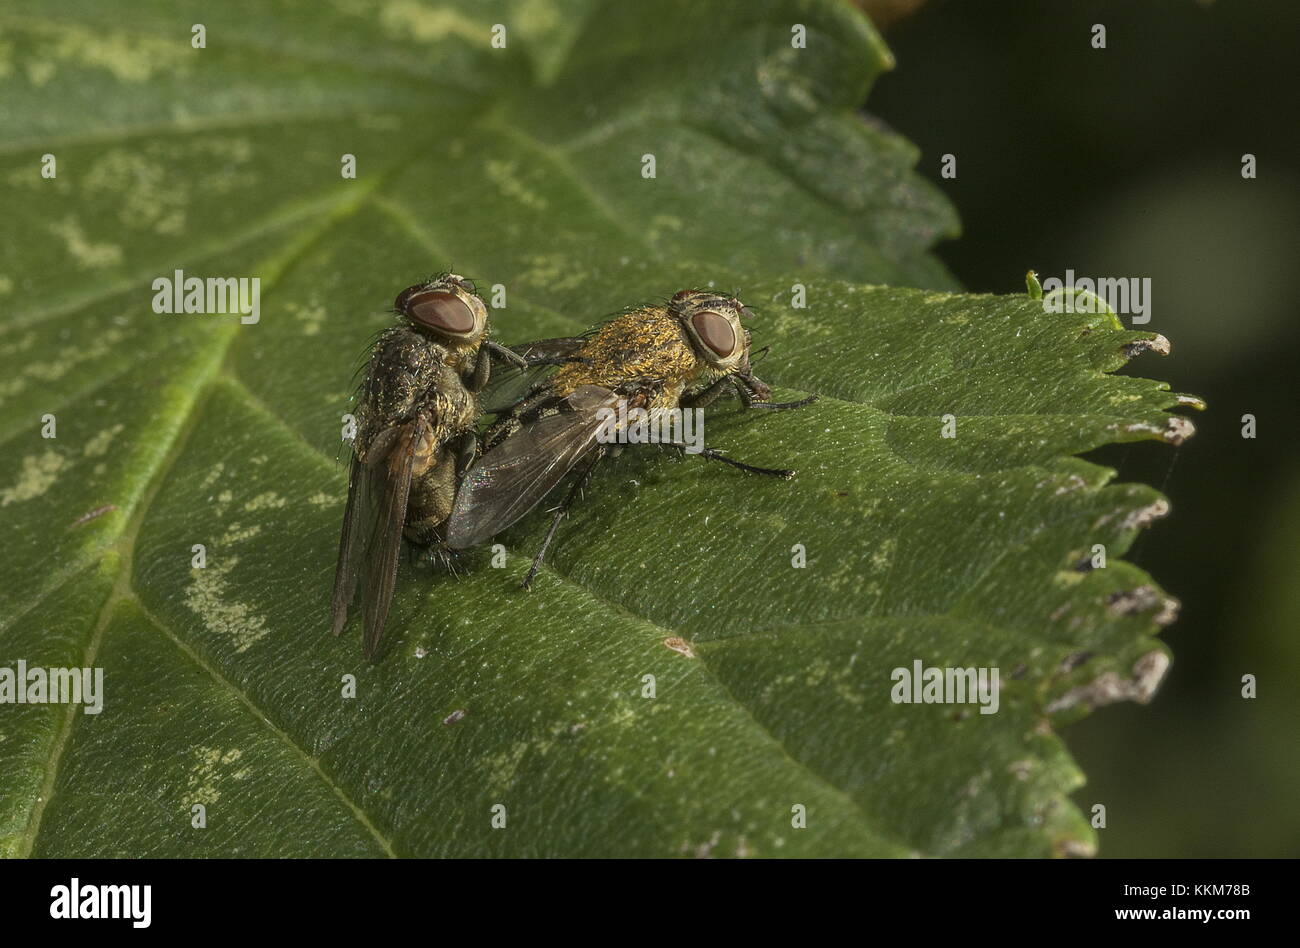 Mating Common cluster flies, Pollenia rudis, on leaf. Larval parasites of earthworms. Stock Photo